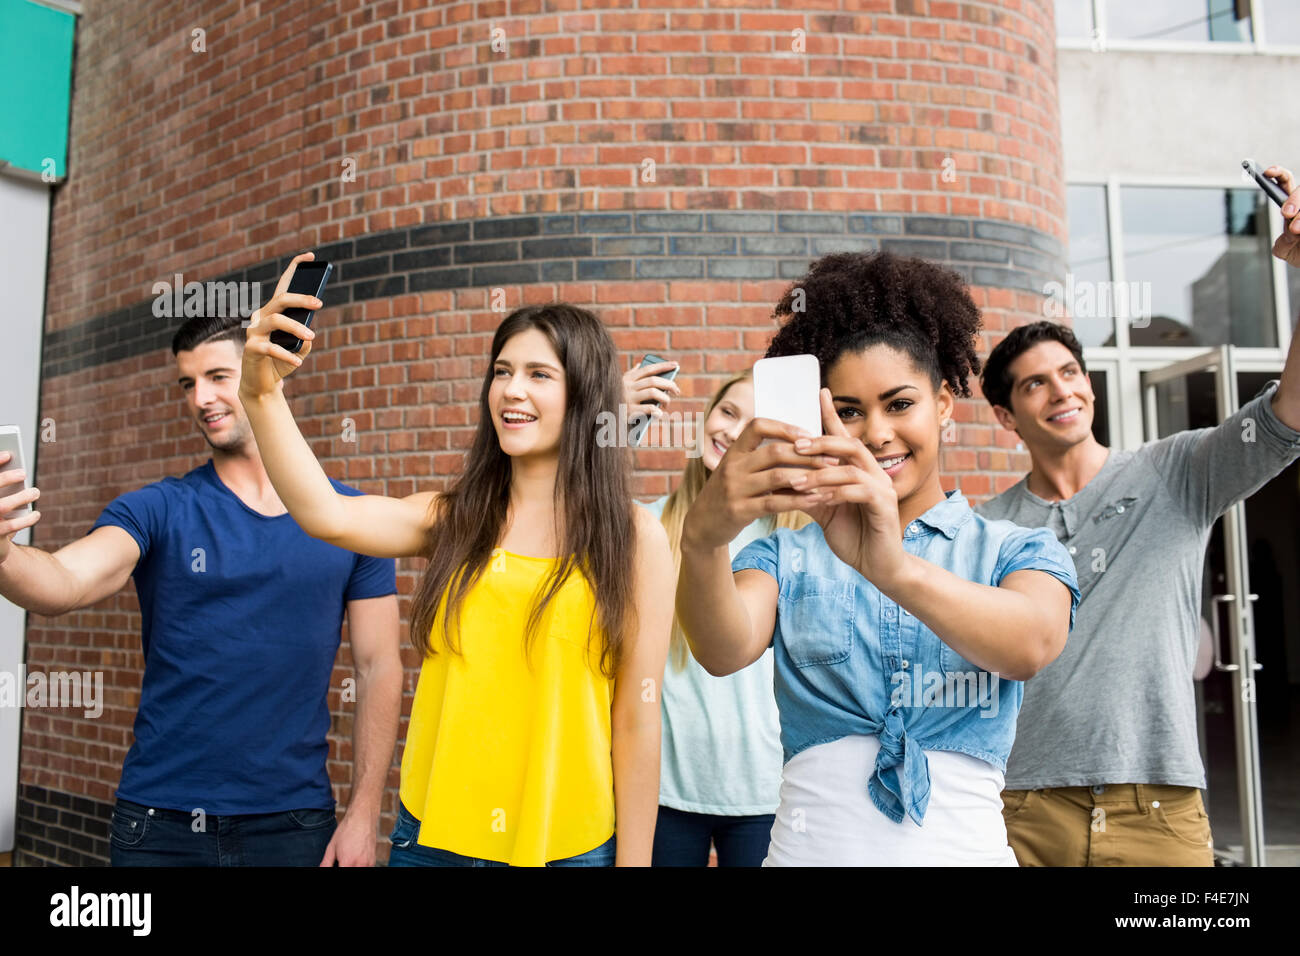 Students all taking selfies together Stock Photo